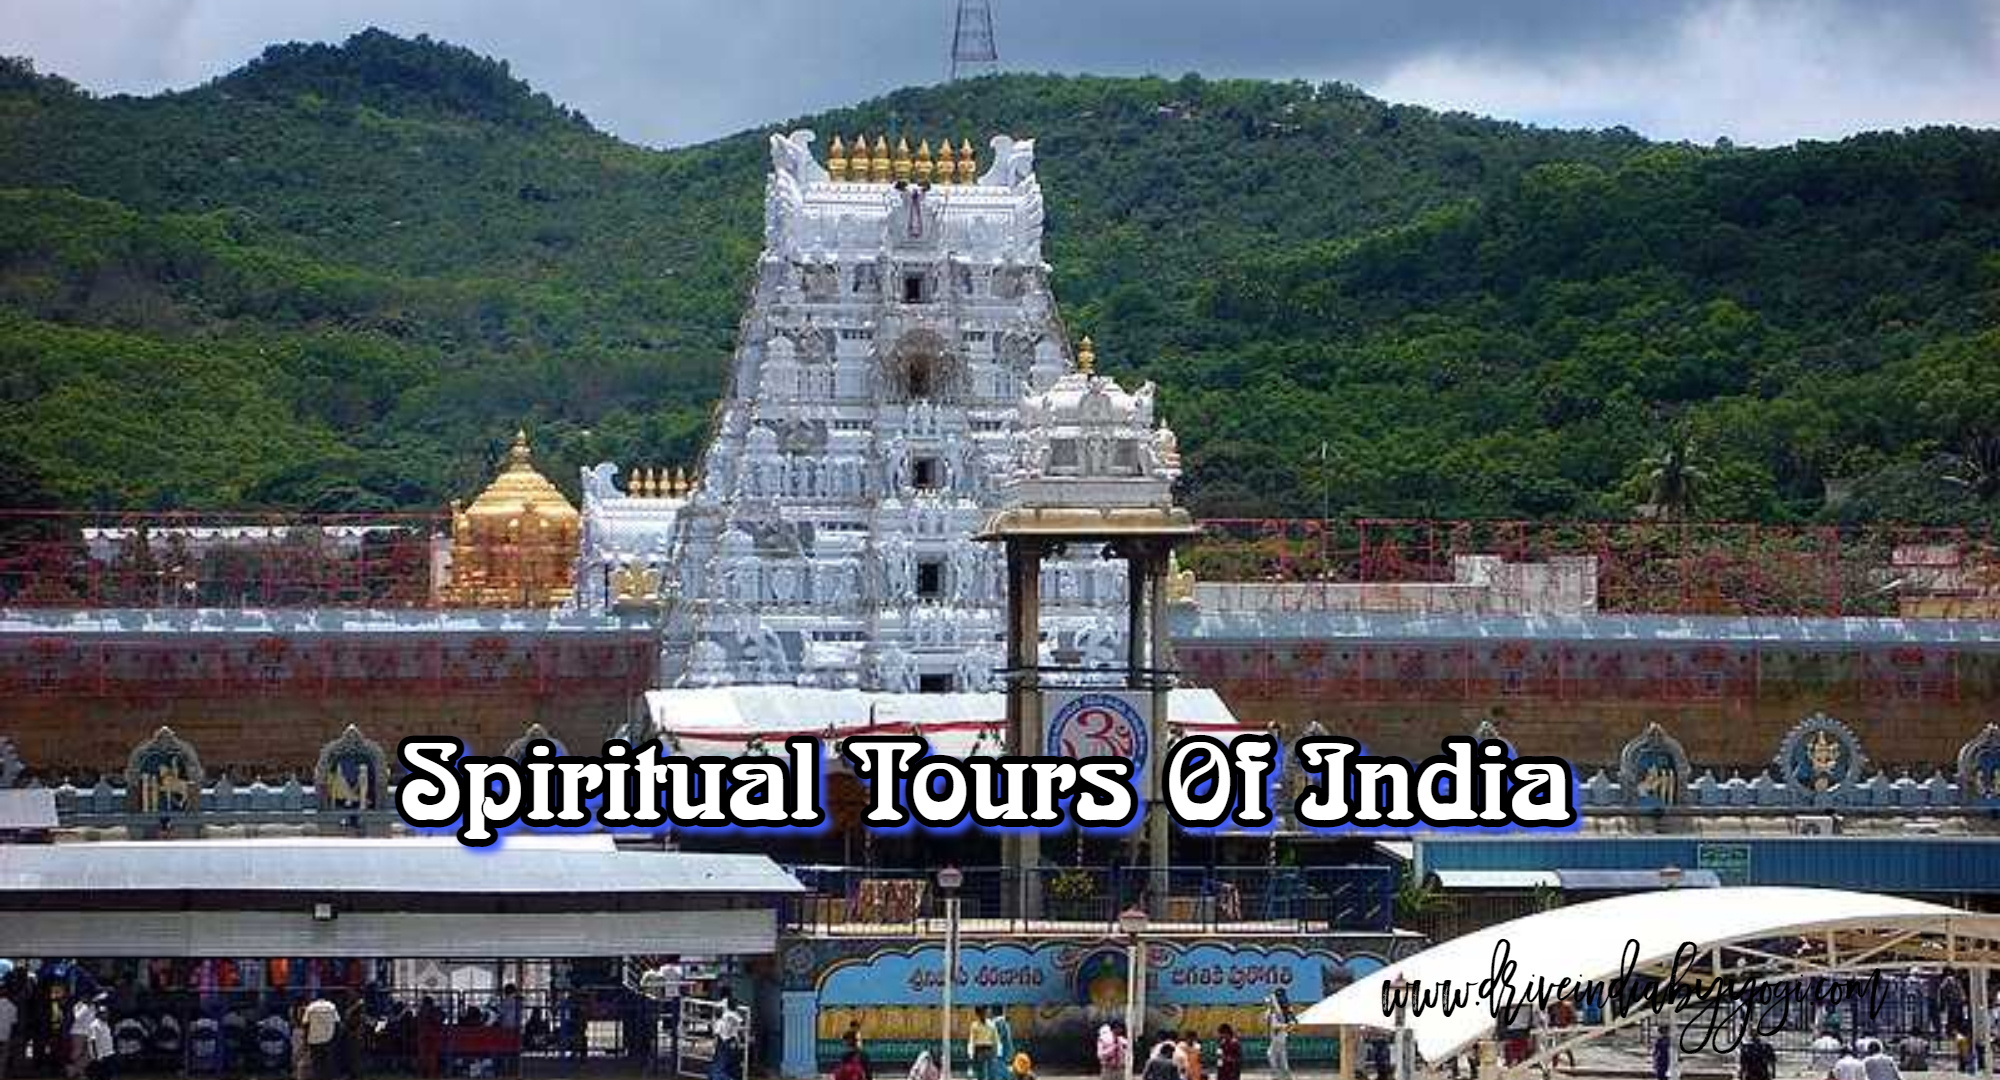 spiritual tours of india, best india tour packages, travel agency in india, tour operator in india, drive india by yogi